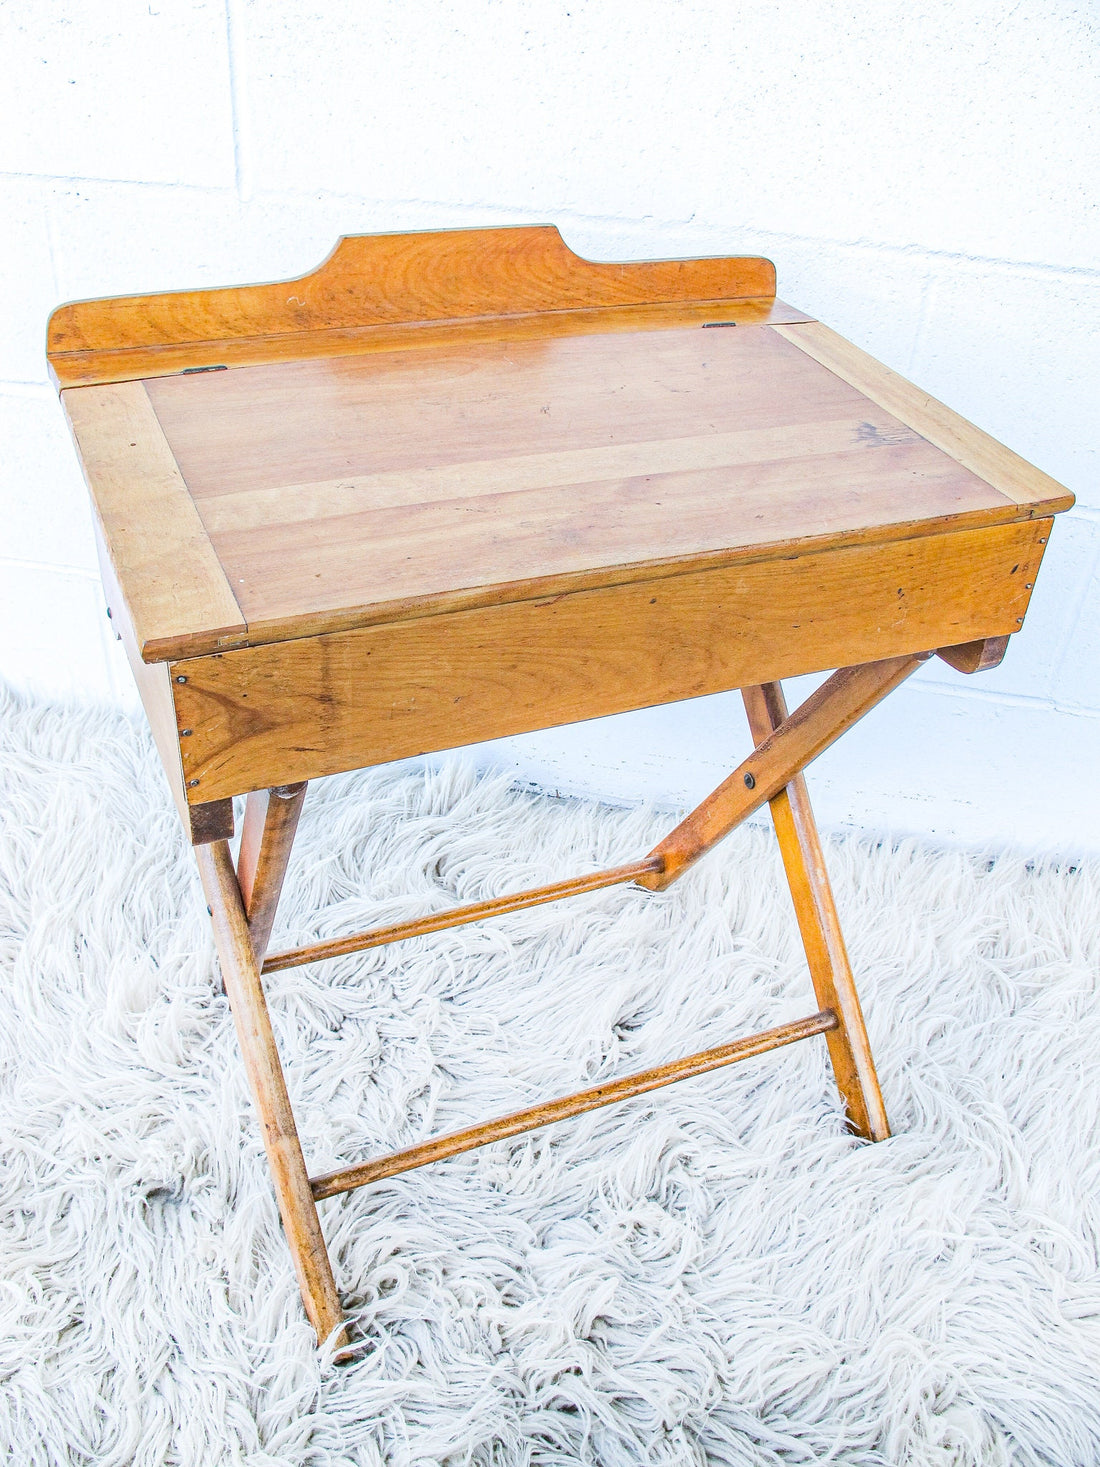 Folding Wood Kids Childrens Desk with Chair